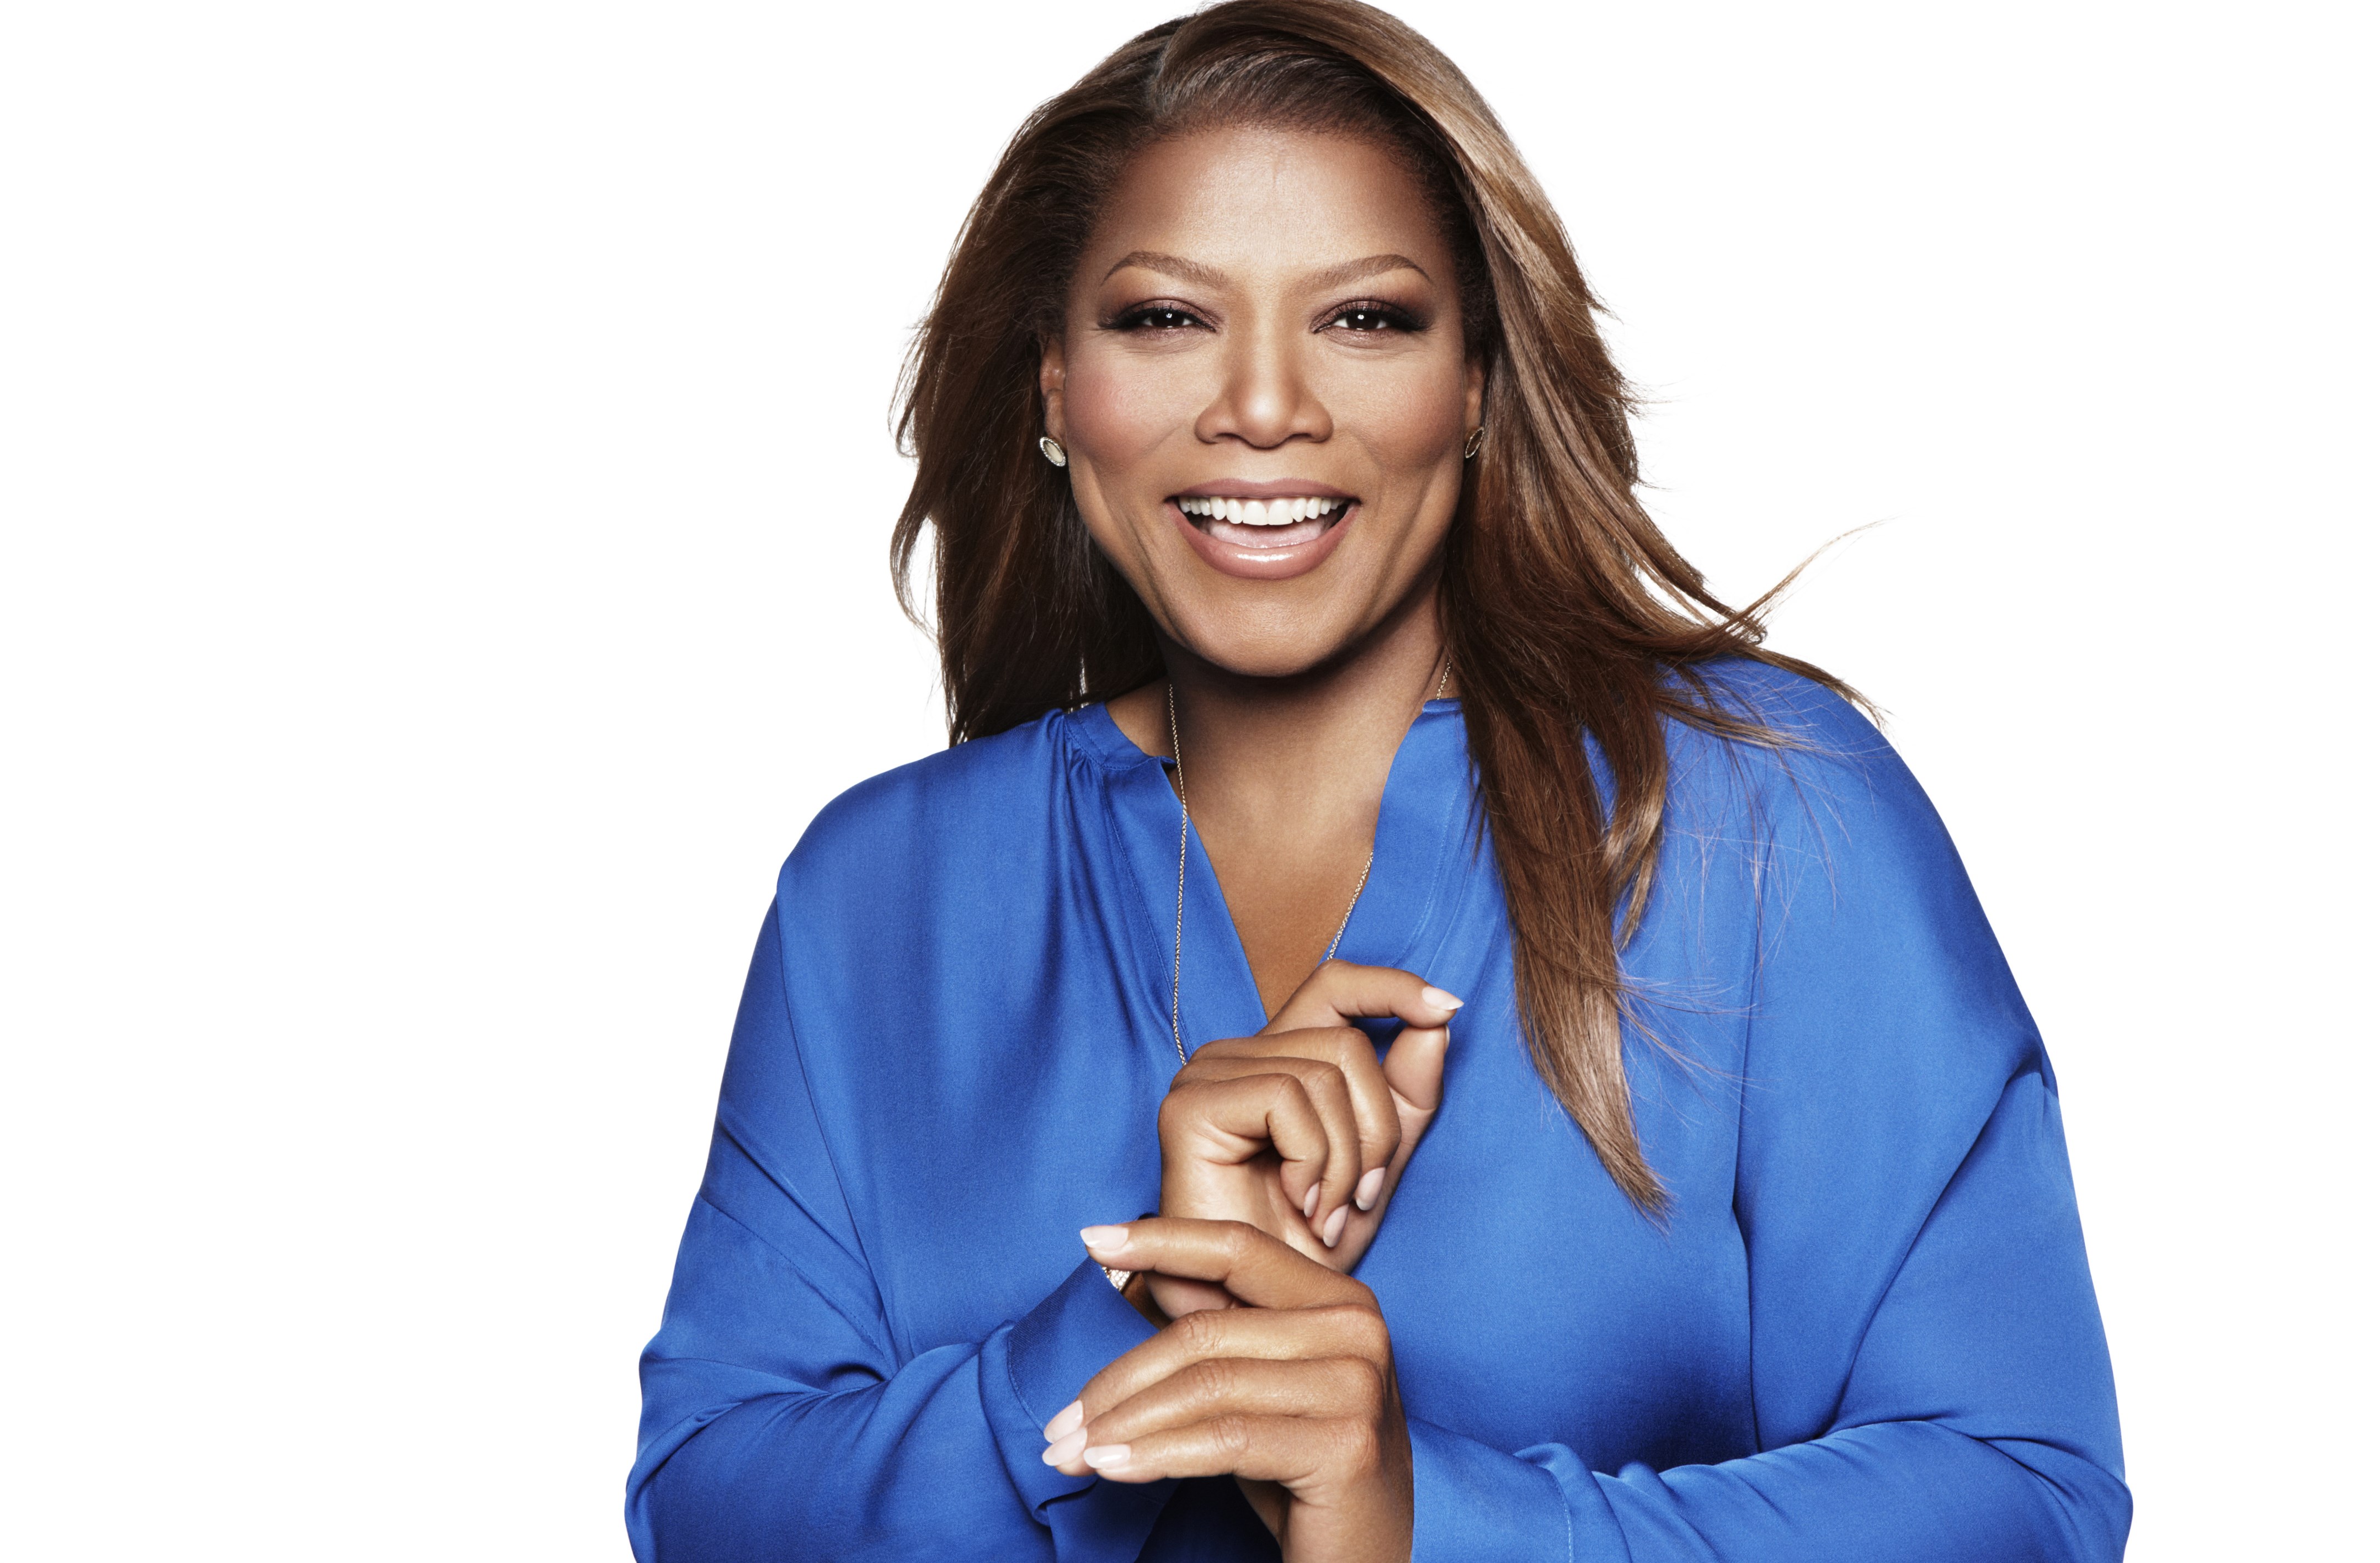 Queen Latifah Best Movies and TV shows. Find it out!